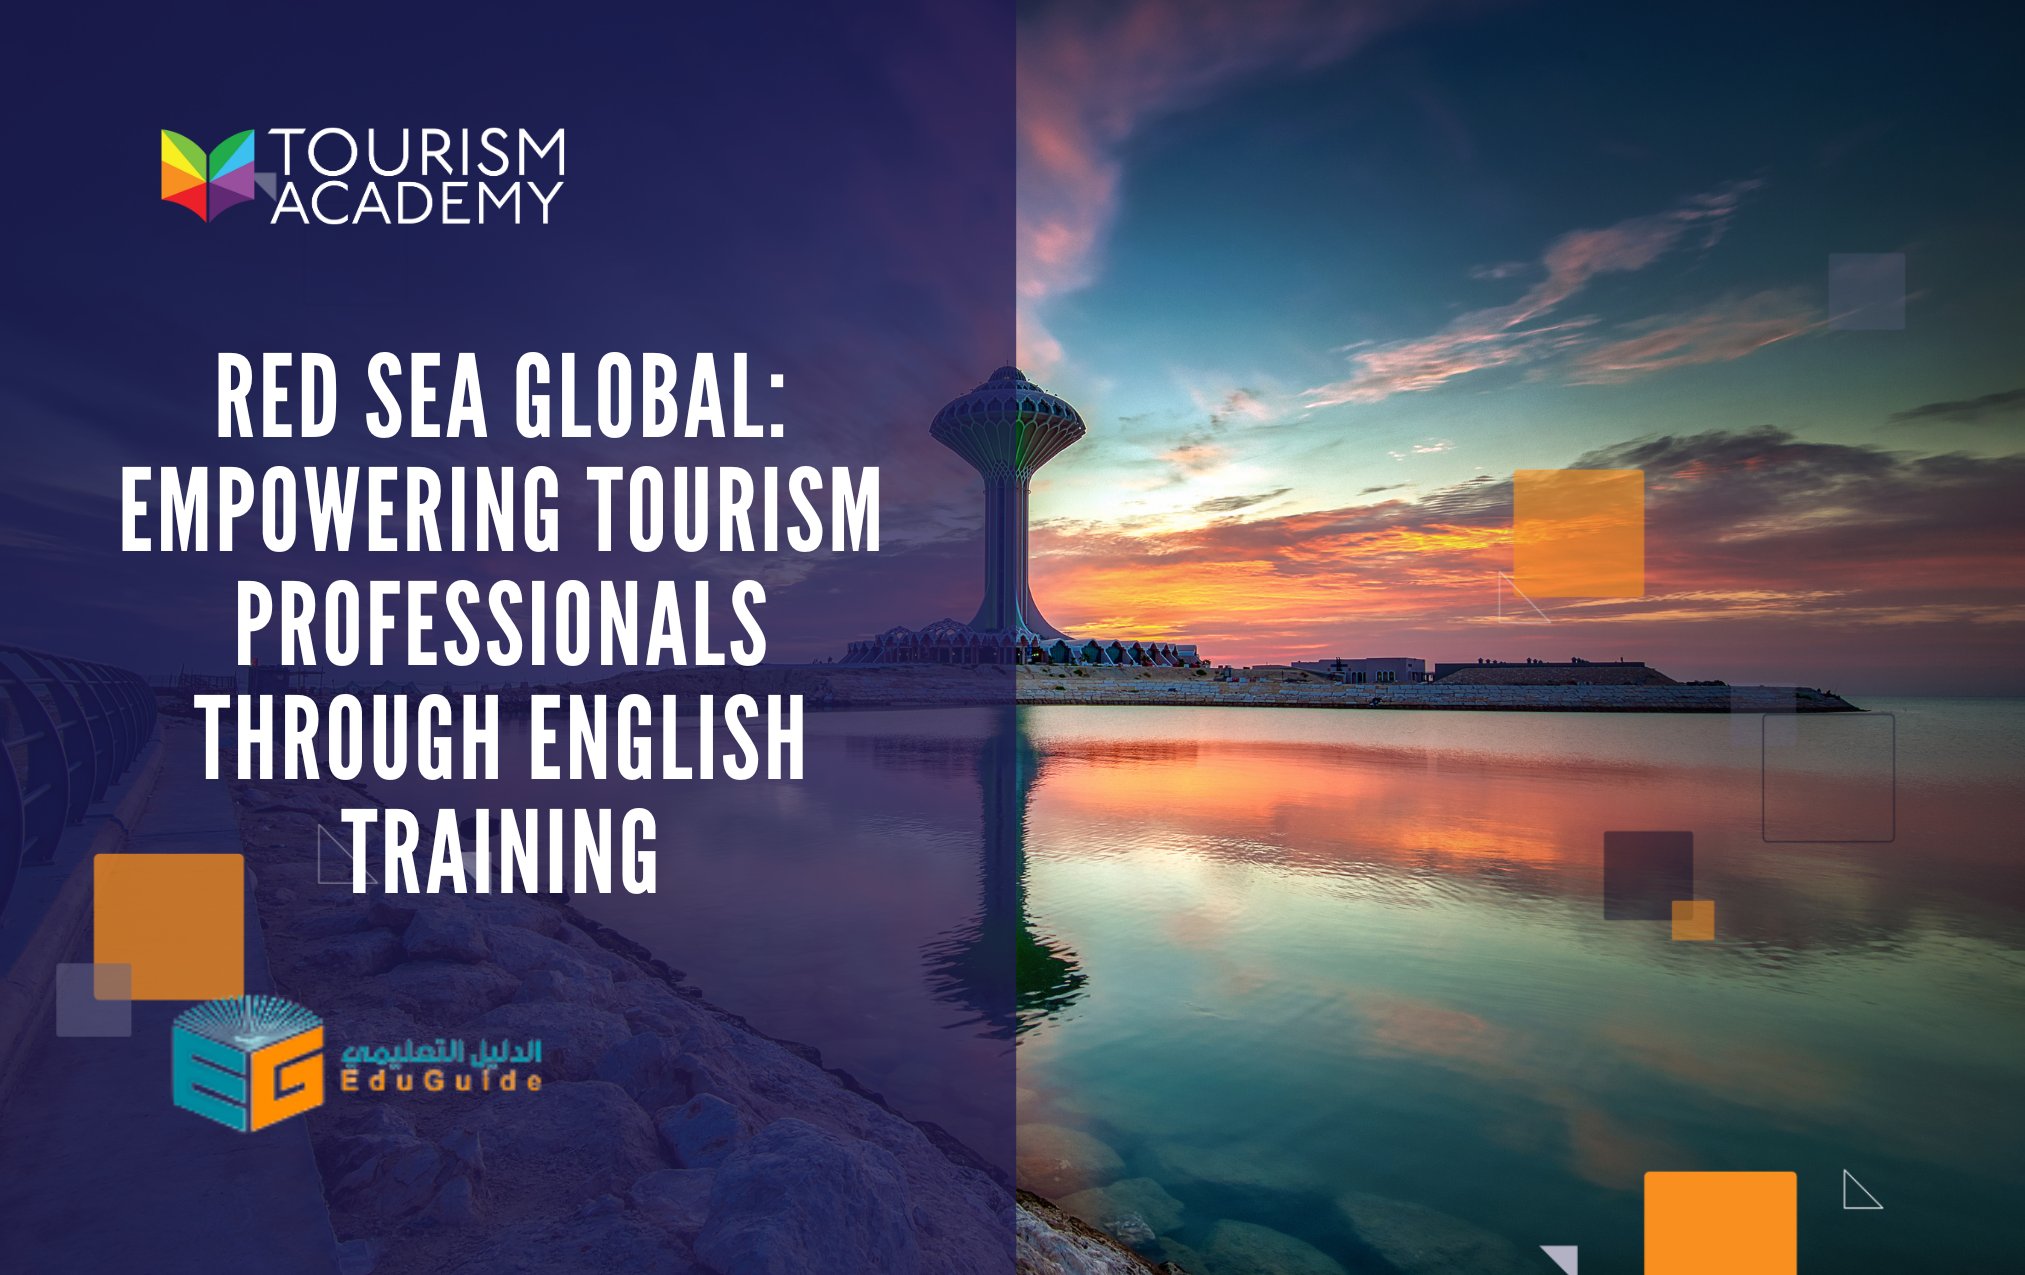 Red Sea Global: Empowering Tourism Professionals through English